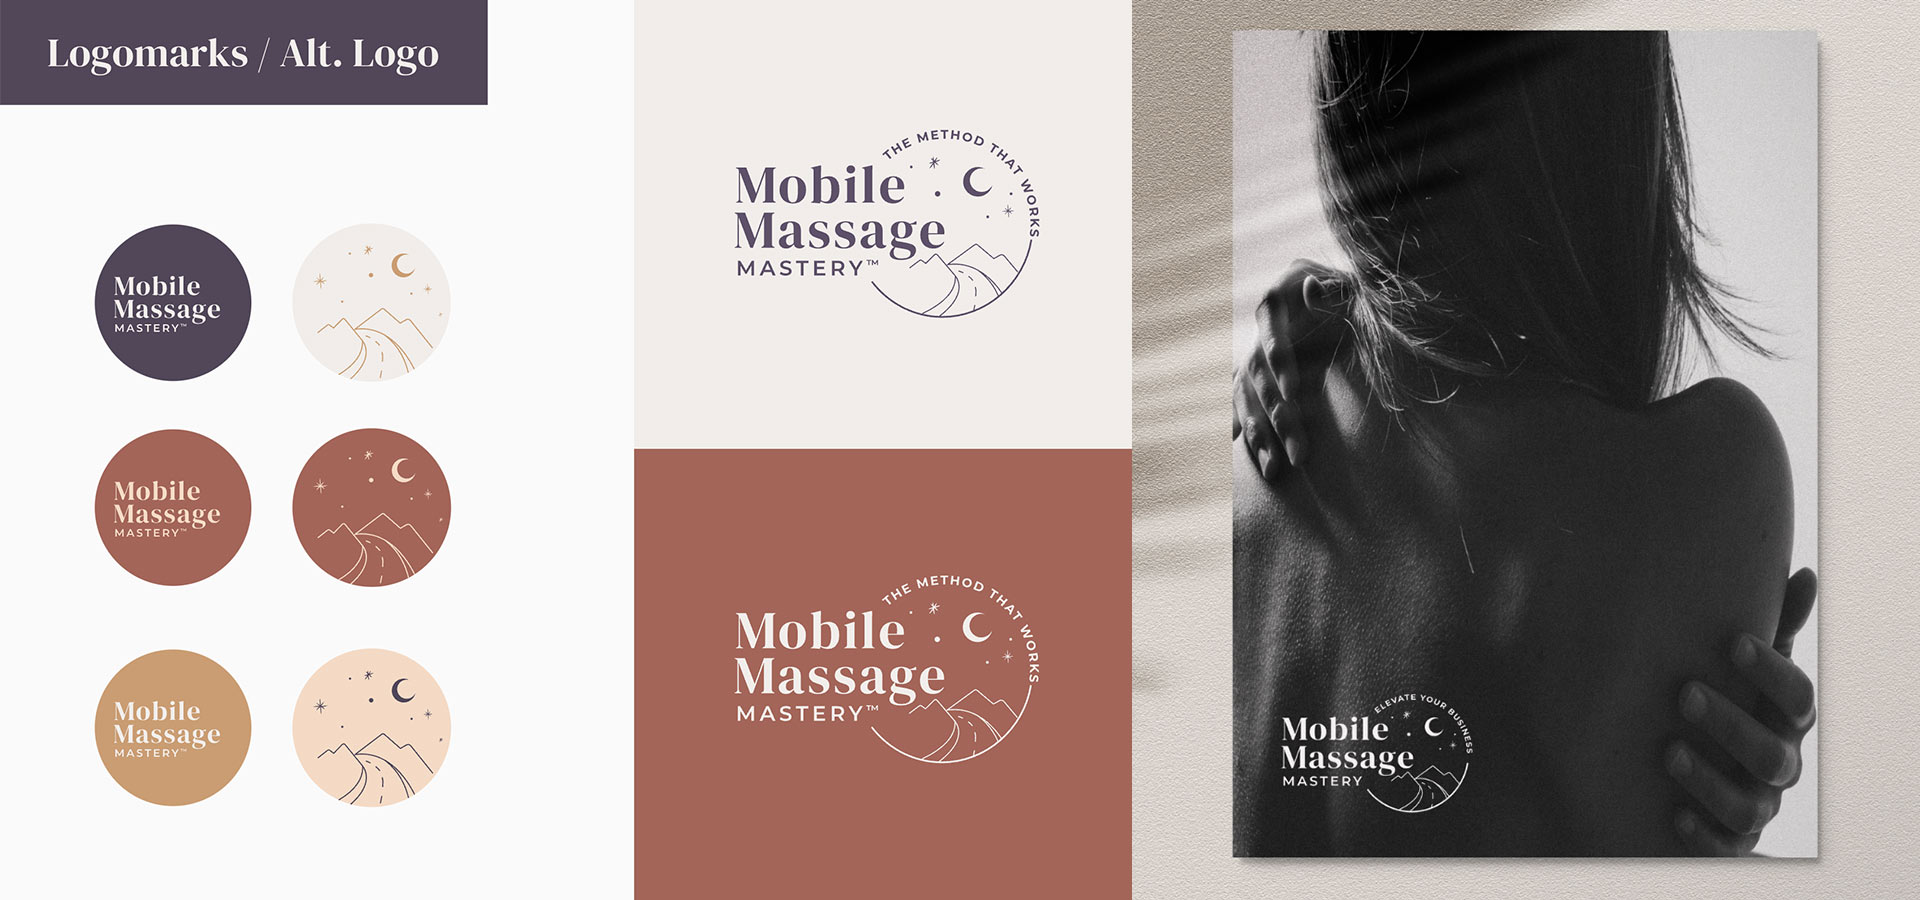 Icon Style Guide Mobile Massage Mastery